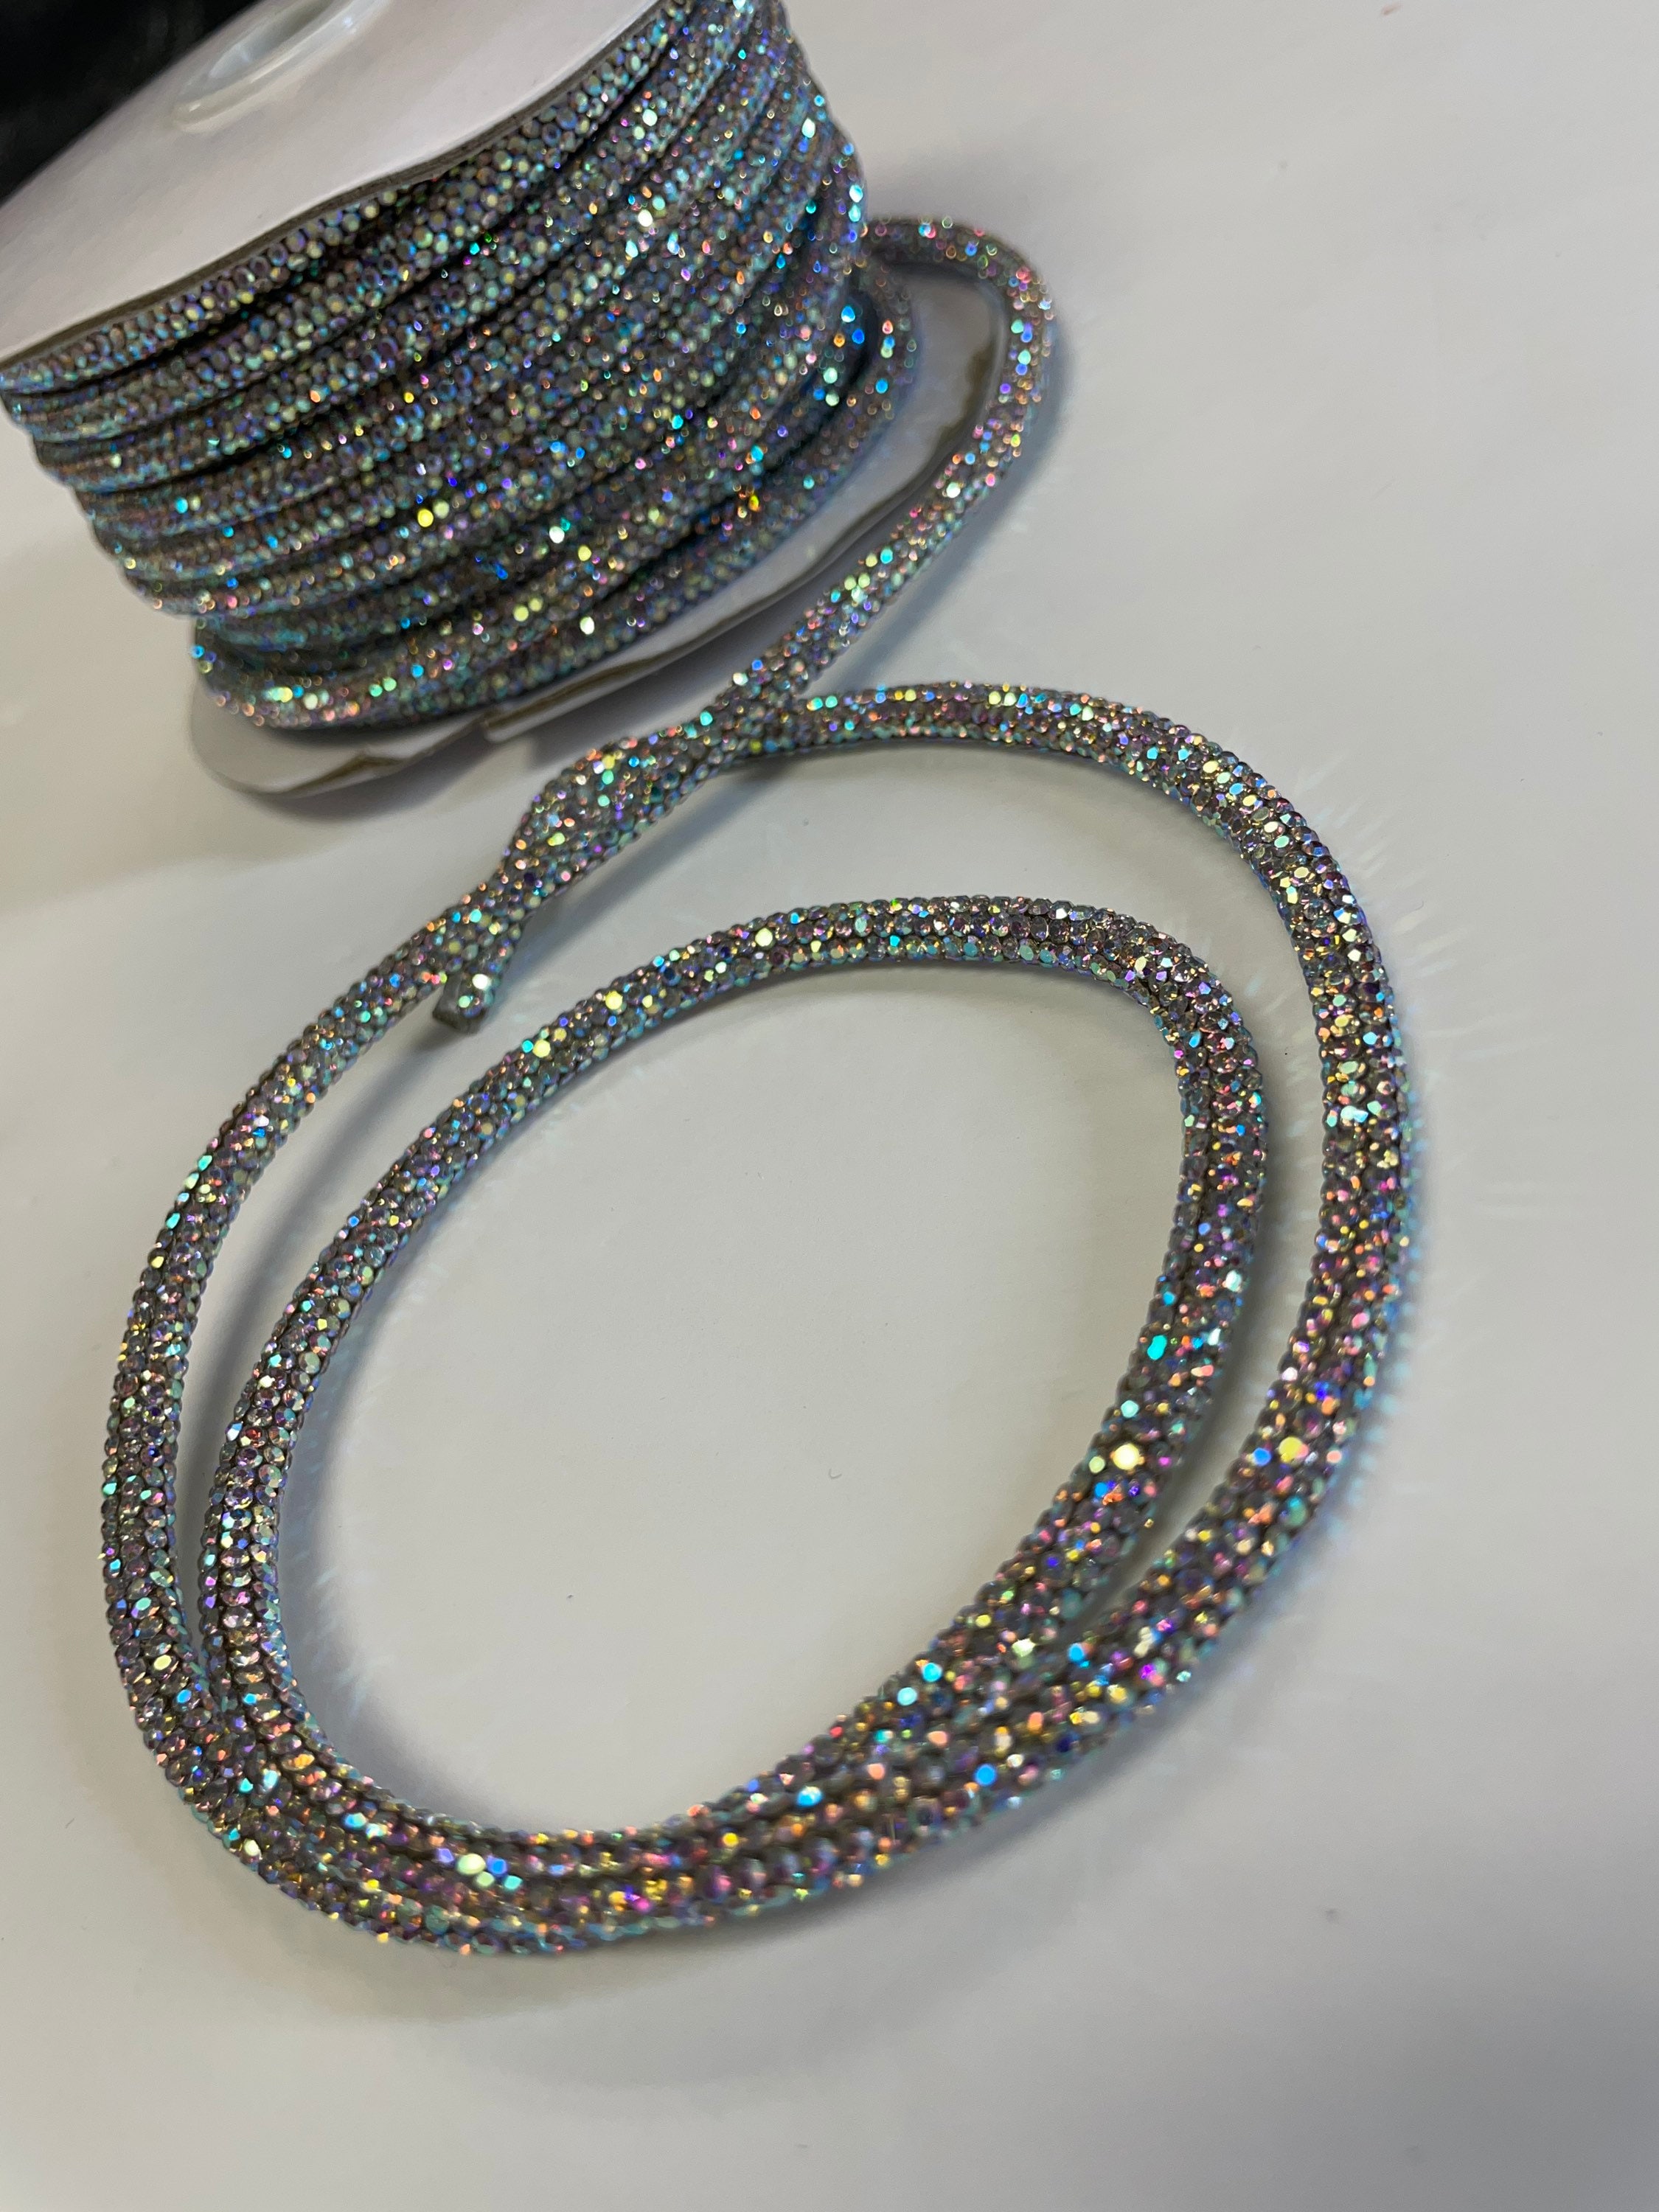 Flexible Rhinestone Rope Trim in Red Blue Zircon Turquoise Rose Gold Great  Sparkle 6-7 Mm, Hollow Center Sold by the Yard 